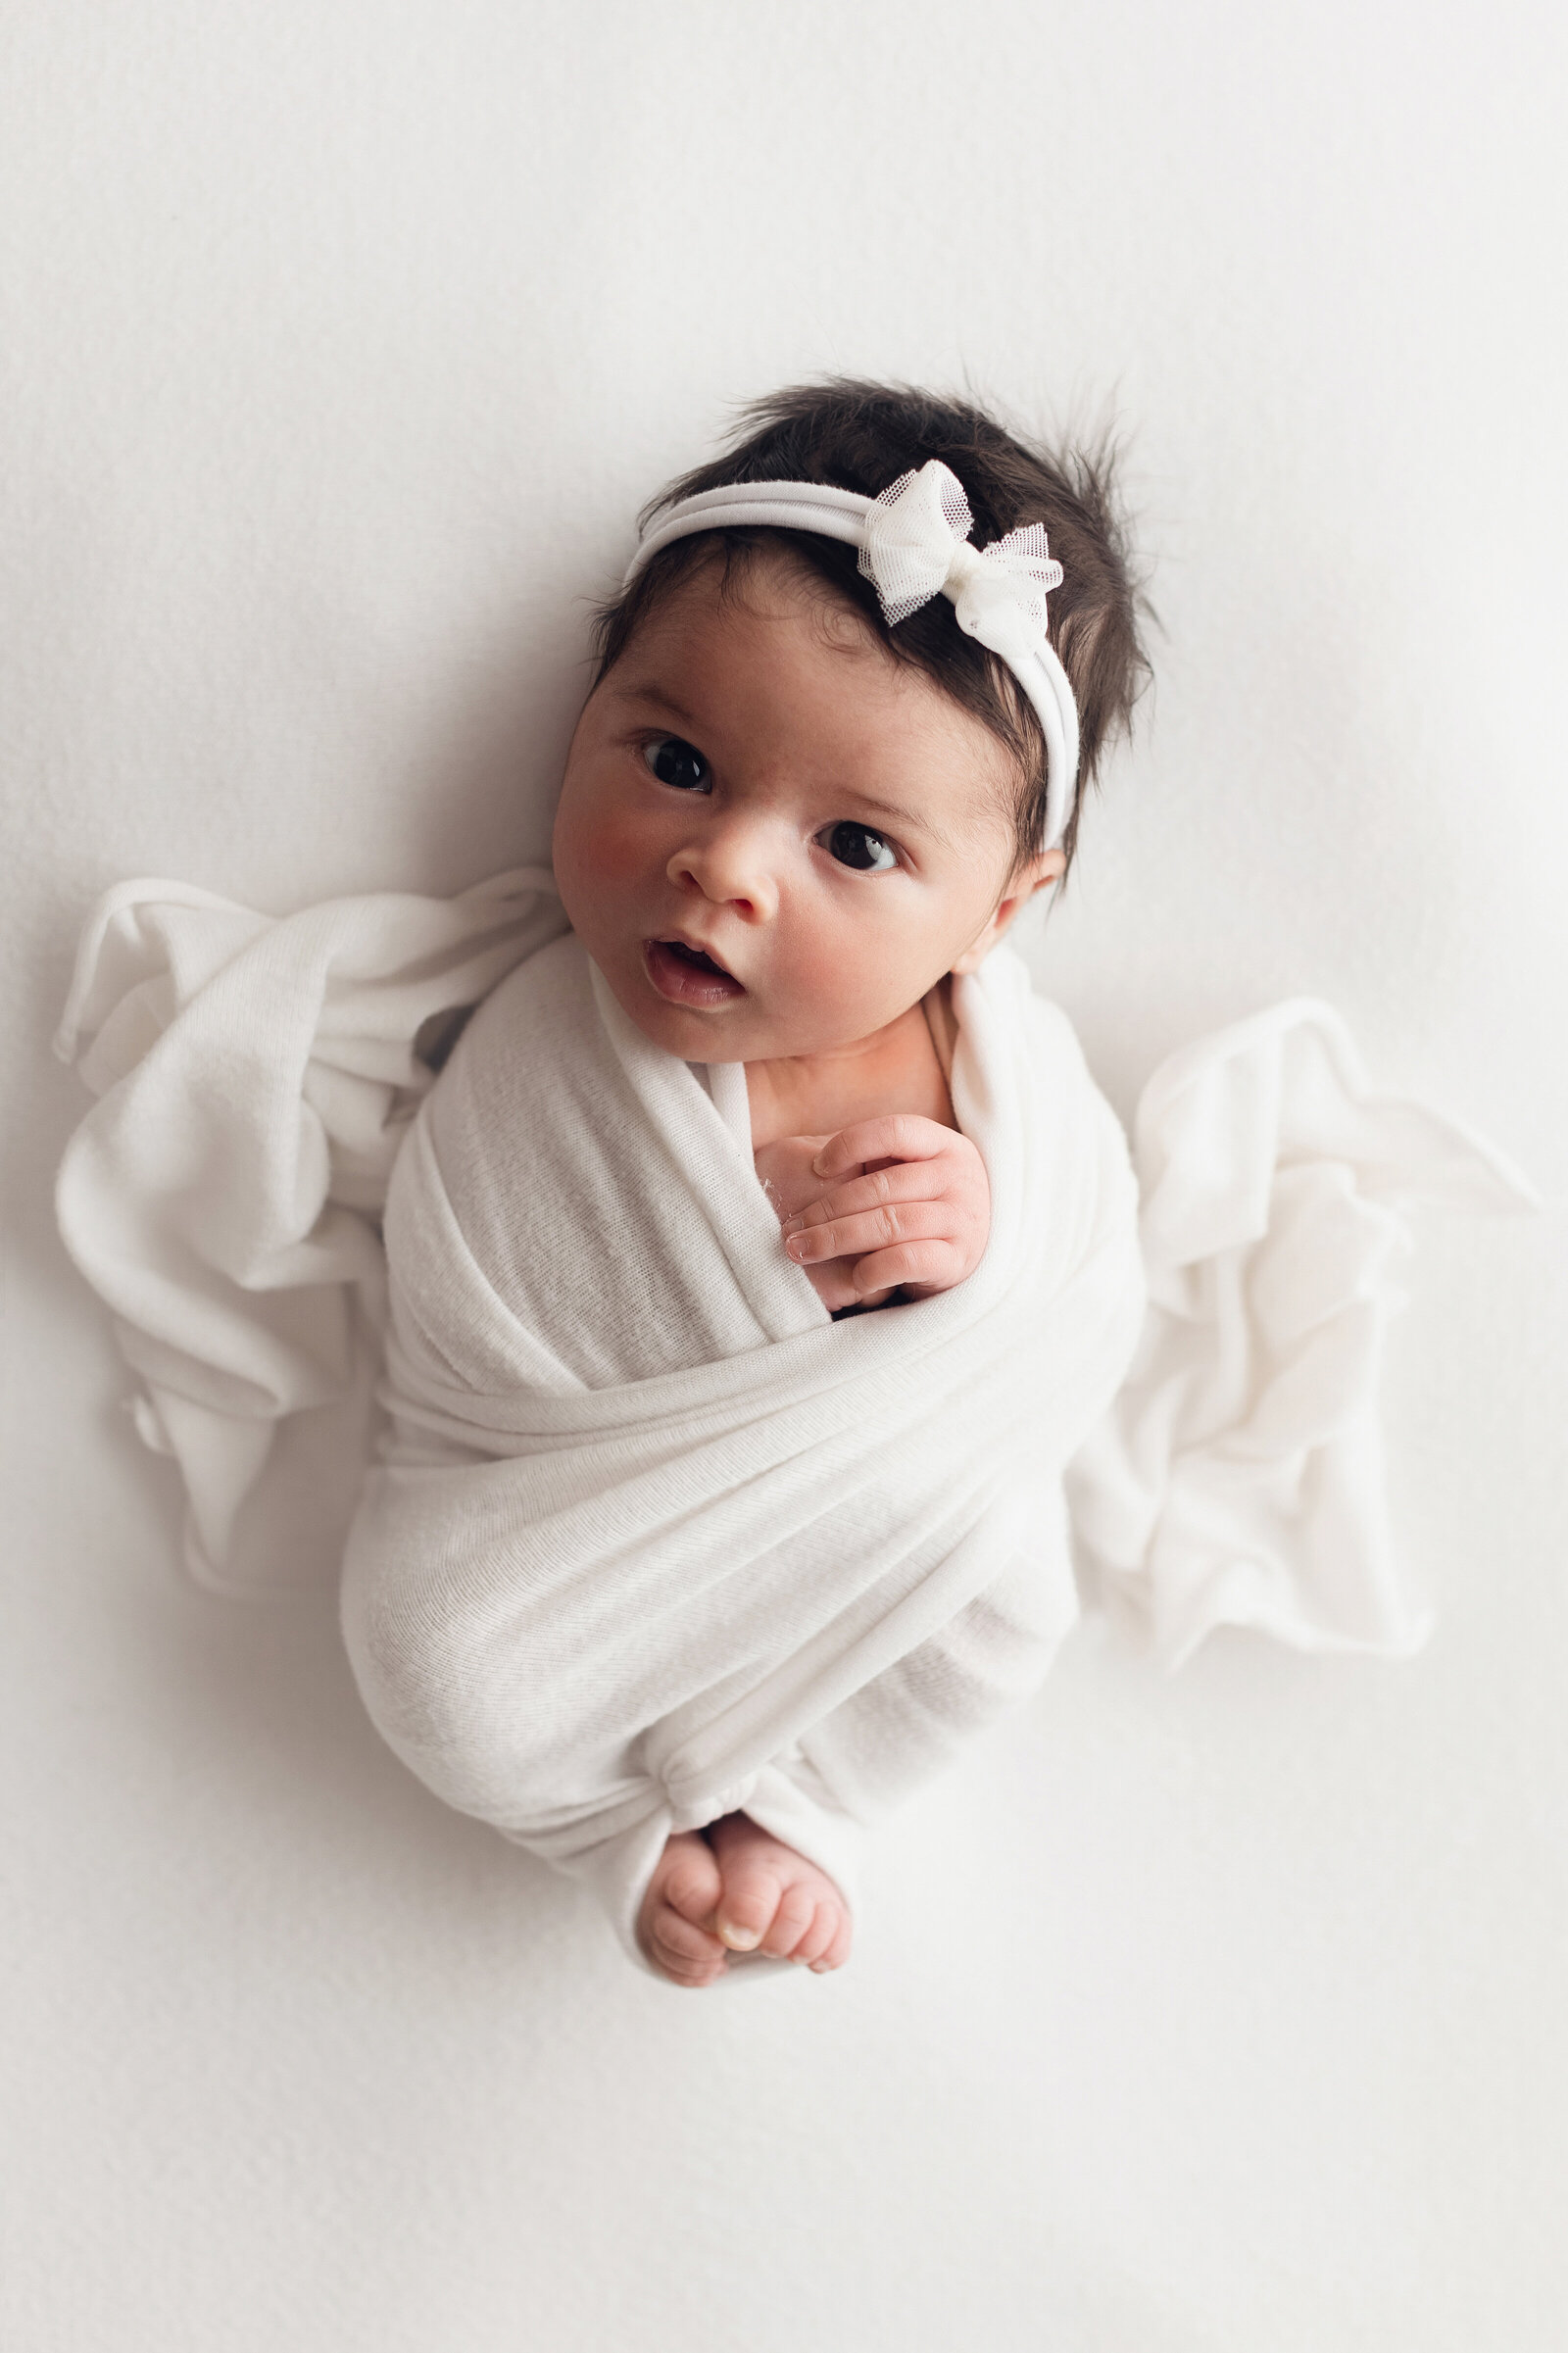 baby girl swaddled in white blanket with white bow in her hair